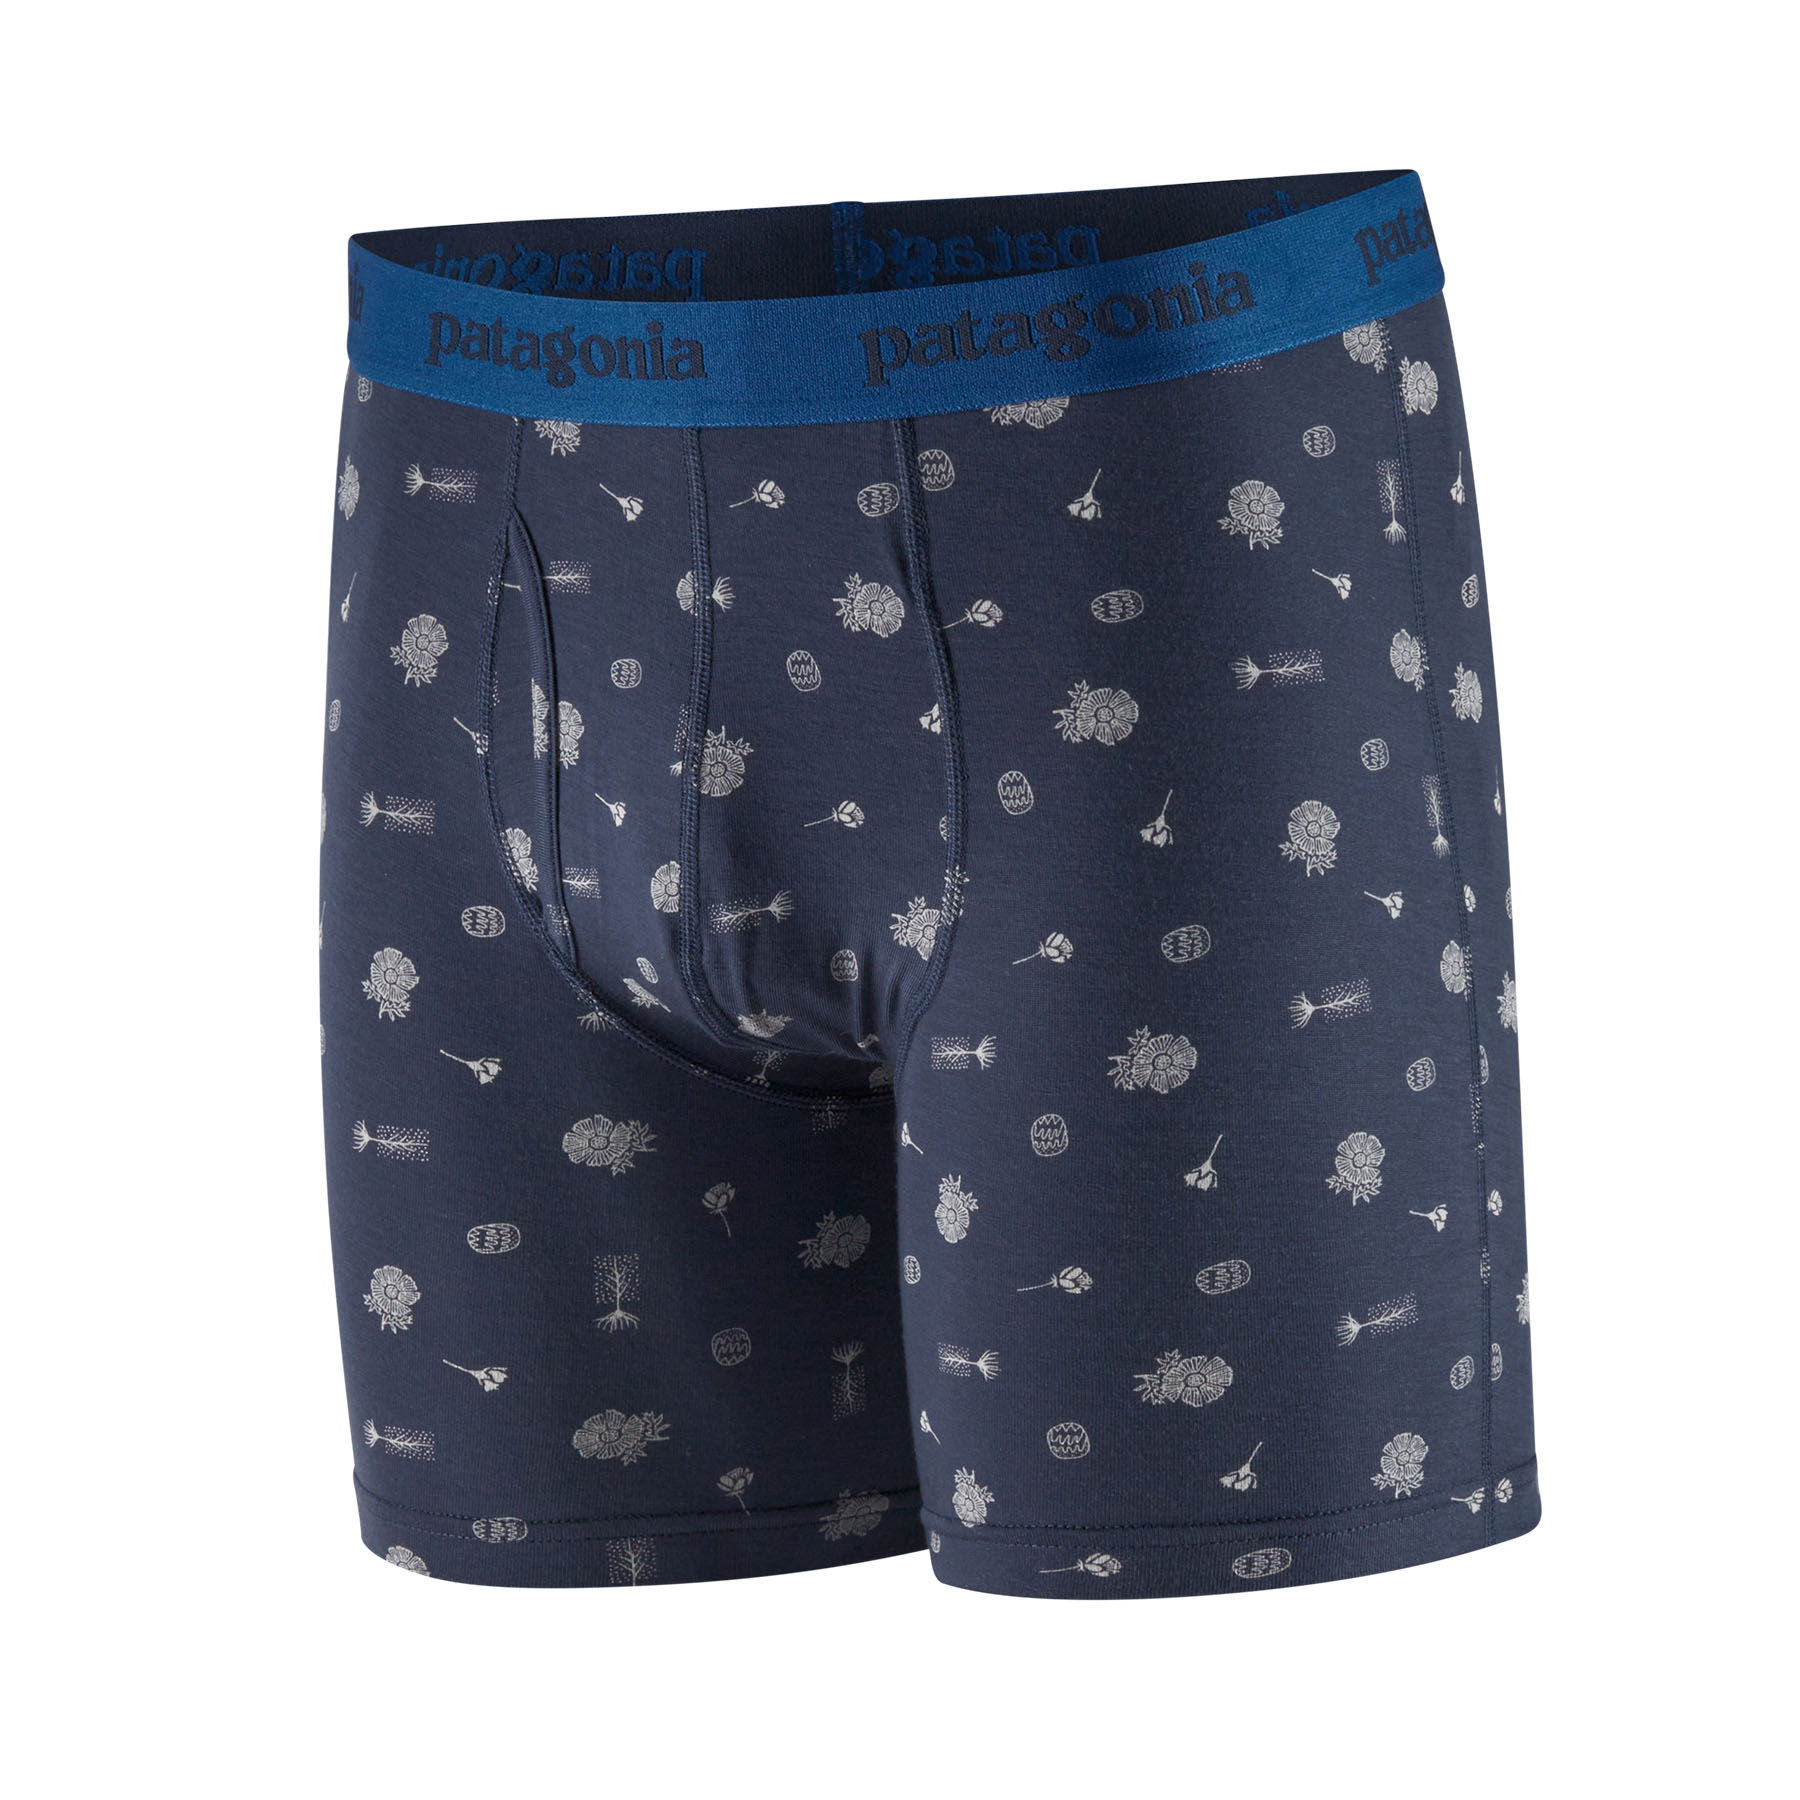 PATAGONIA Men's Essential Boxer Briefs - 6" Fire Floral: New Navy